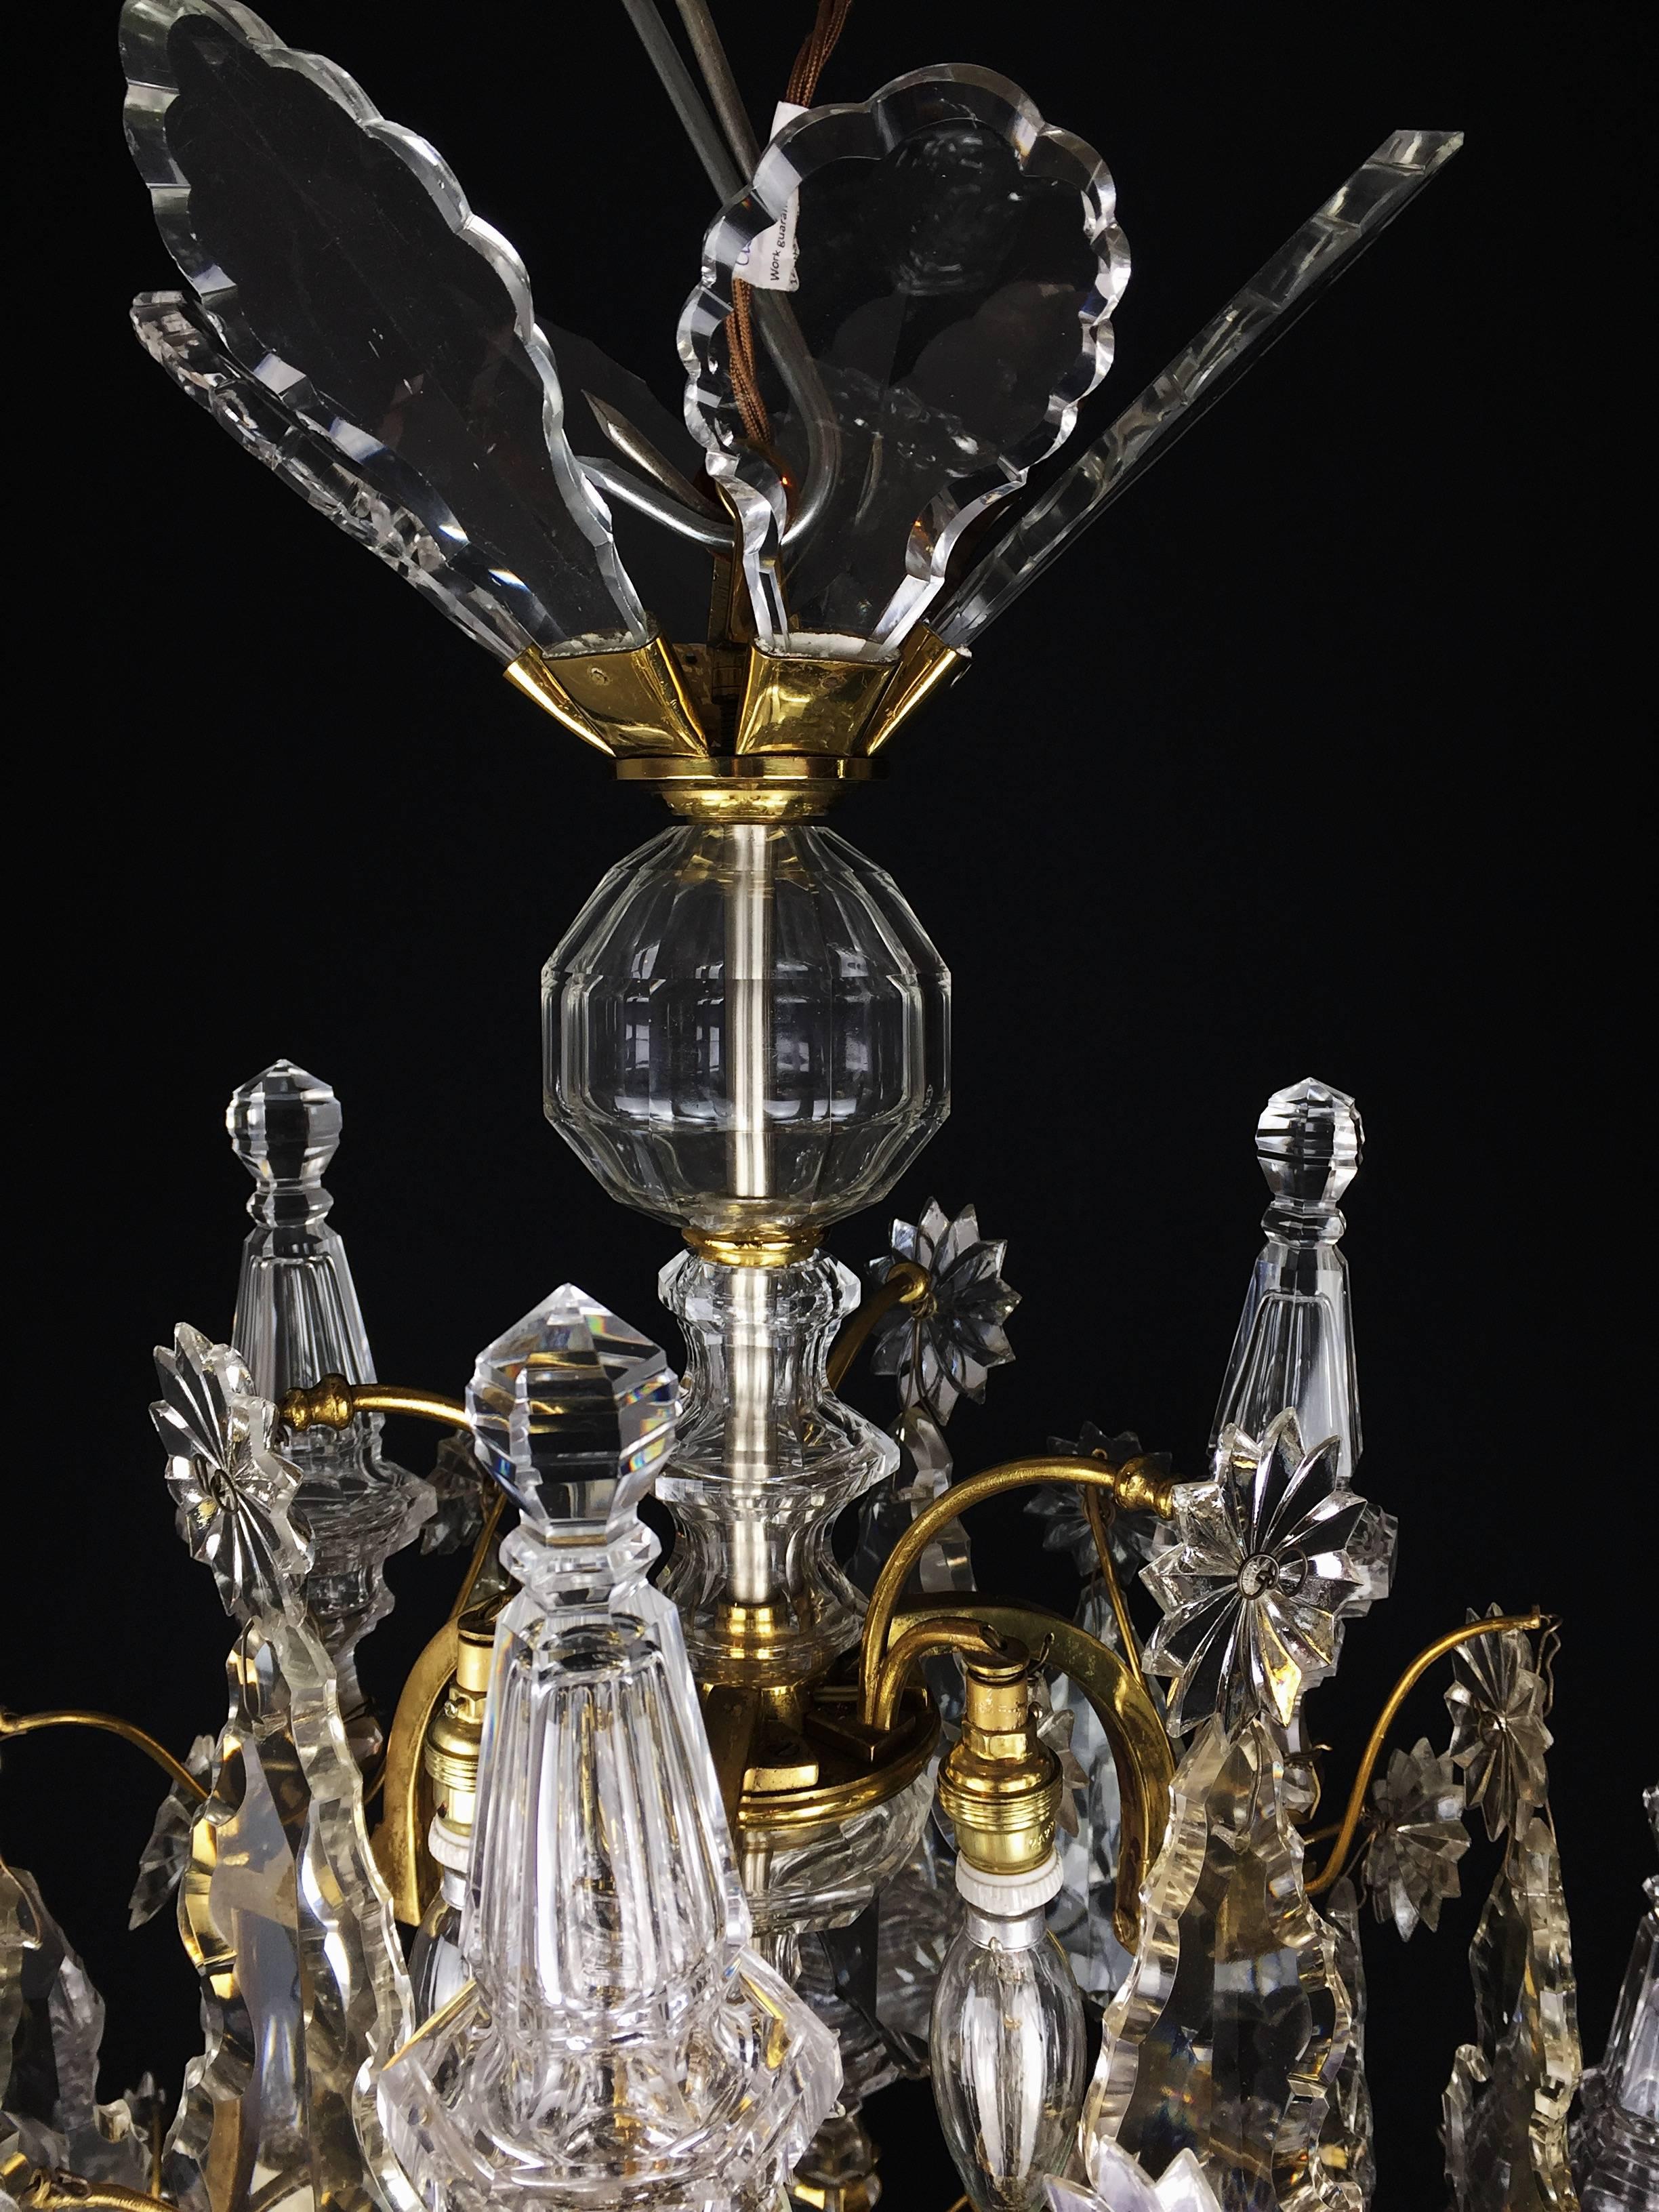 A large baccarat cut-crystal and ormolu chandelier with six curved arms of light decorated with drop-hung drip pans, slice-cut drops, and lower centrally lit pygmy lights. There is a rosette and an alternation of transparent and colored crystal